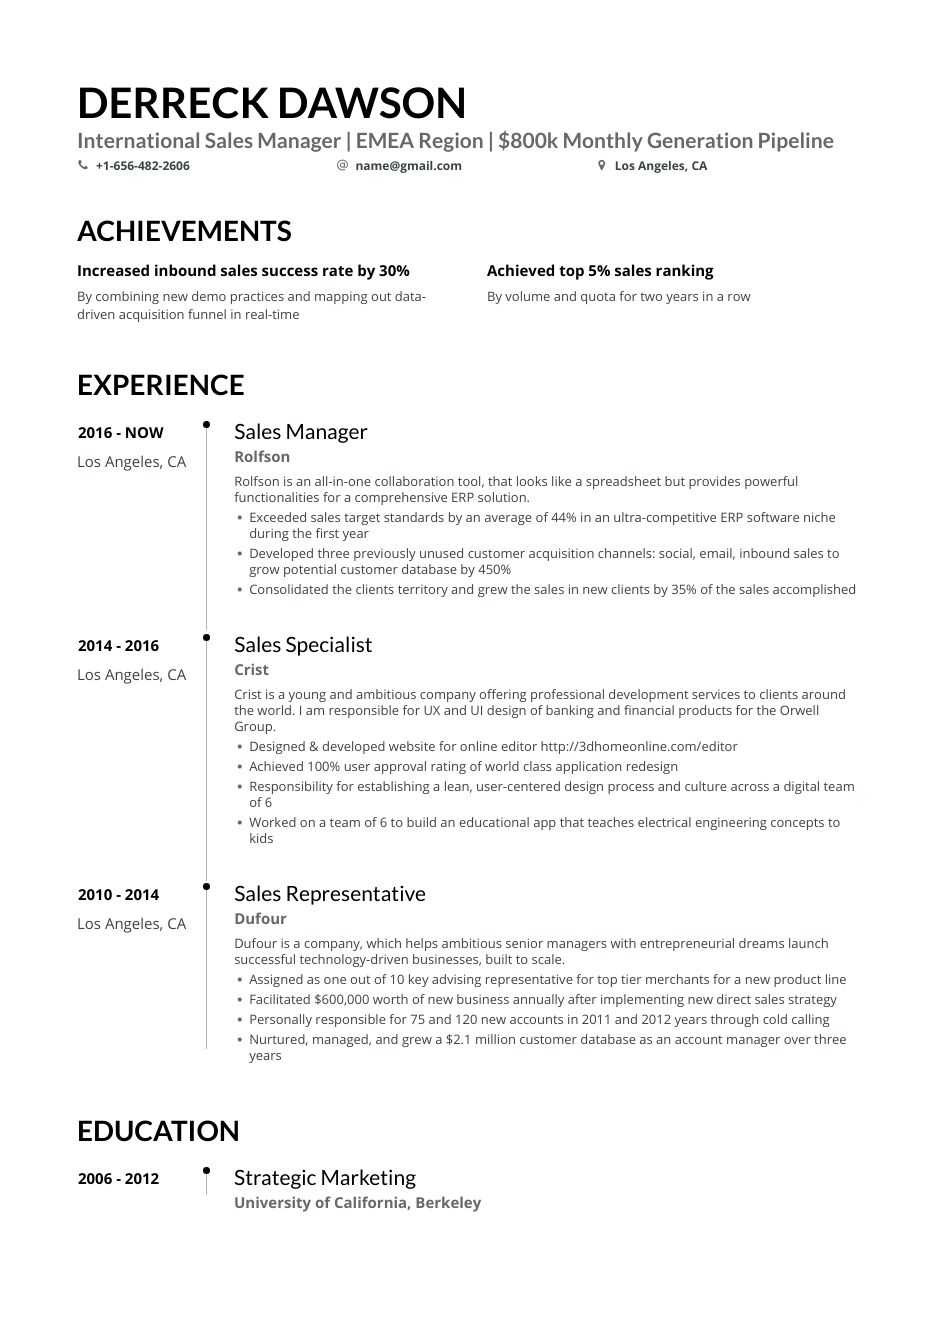 Sample Resume for Sales Manager Position Sales Manager: Resume Examples for 2021